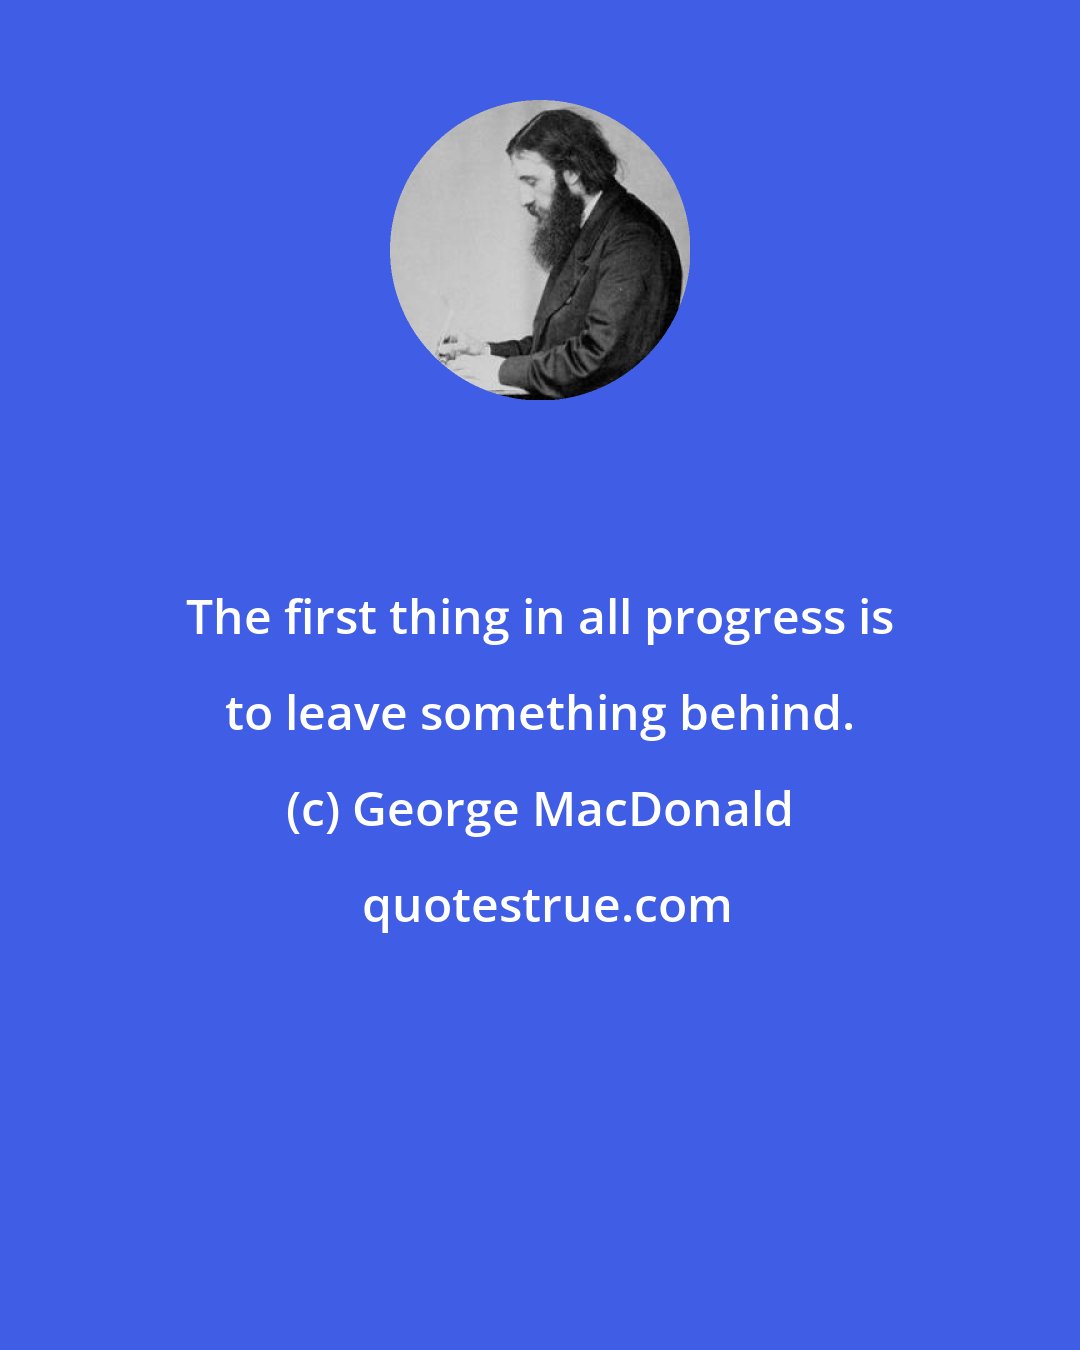 George MacDonald: The first thing in all progress is to leave something behind.